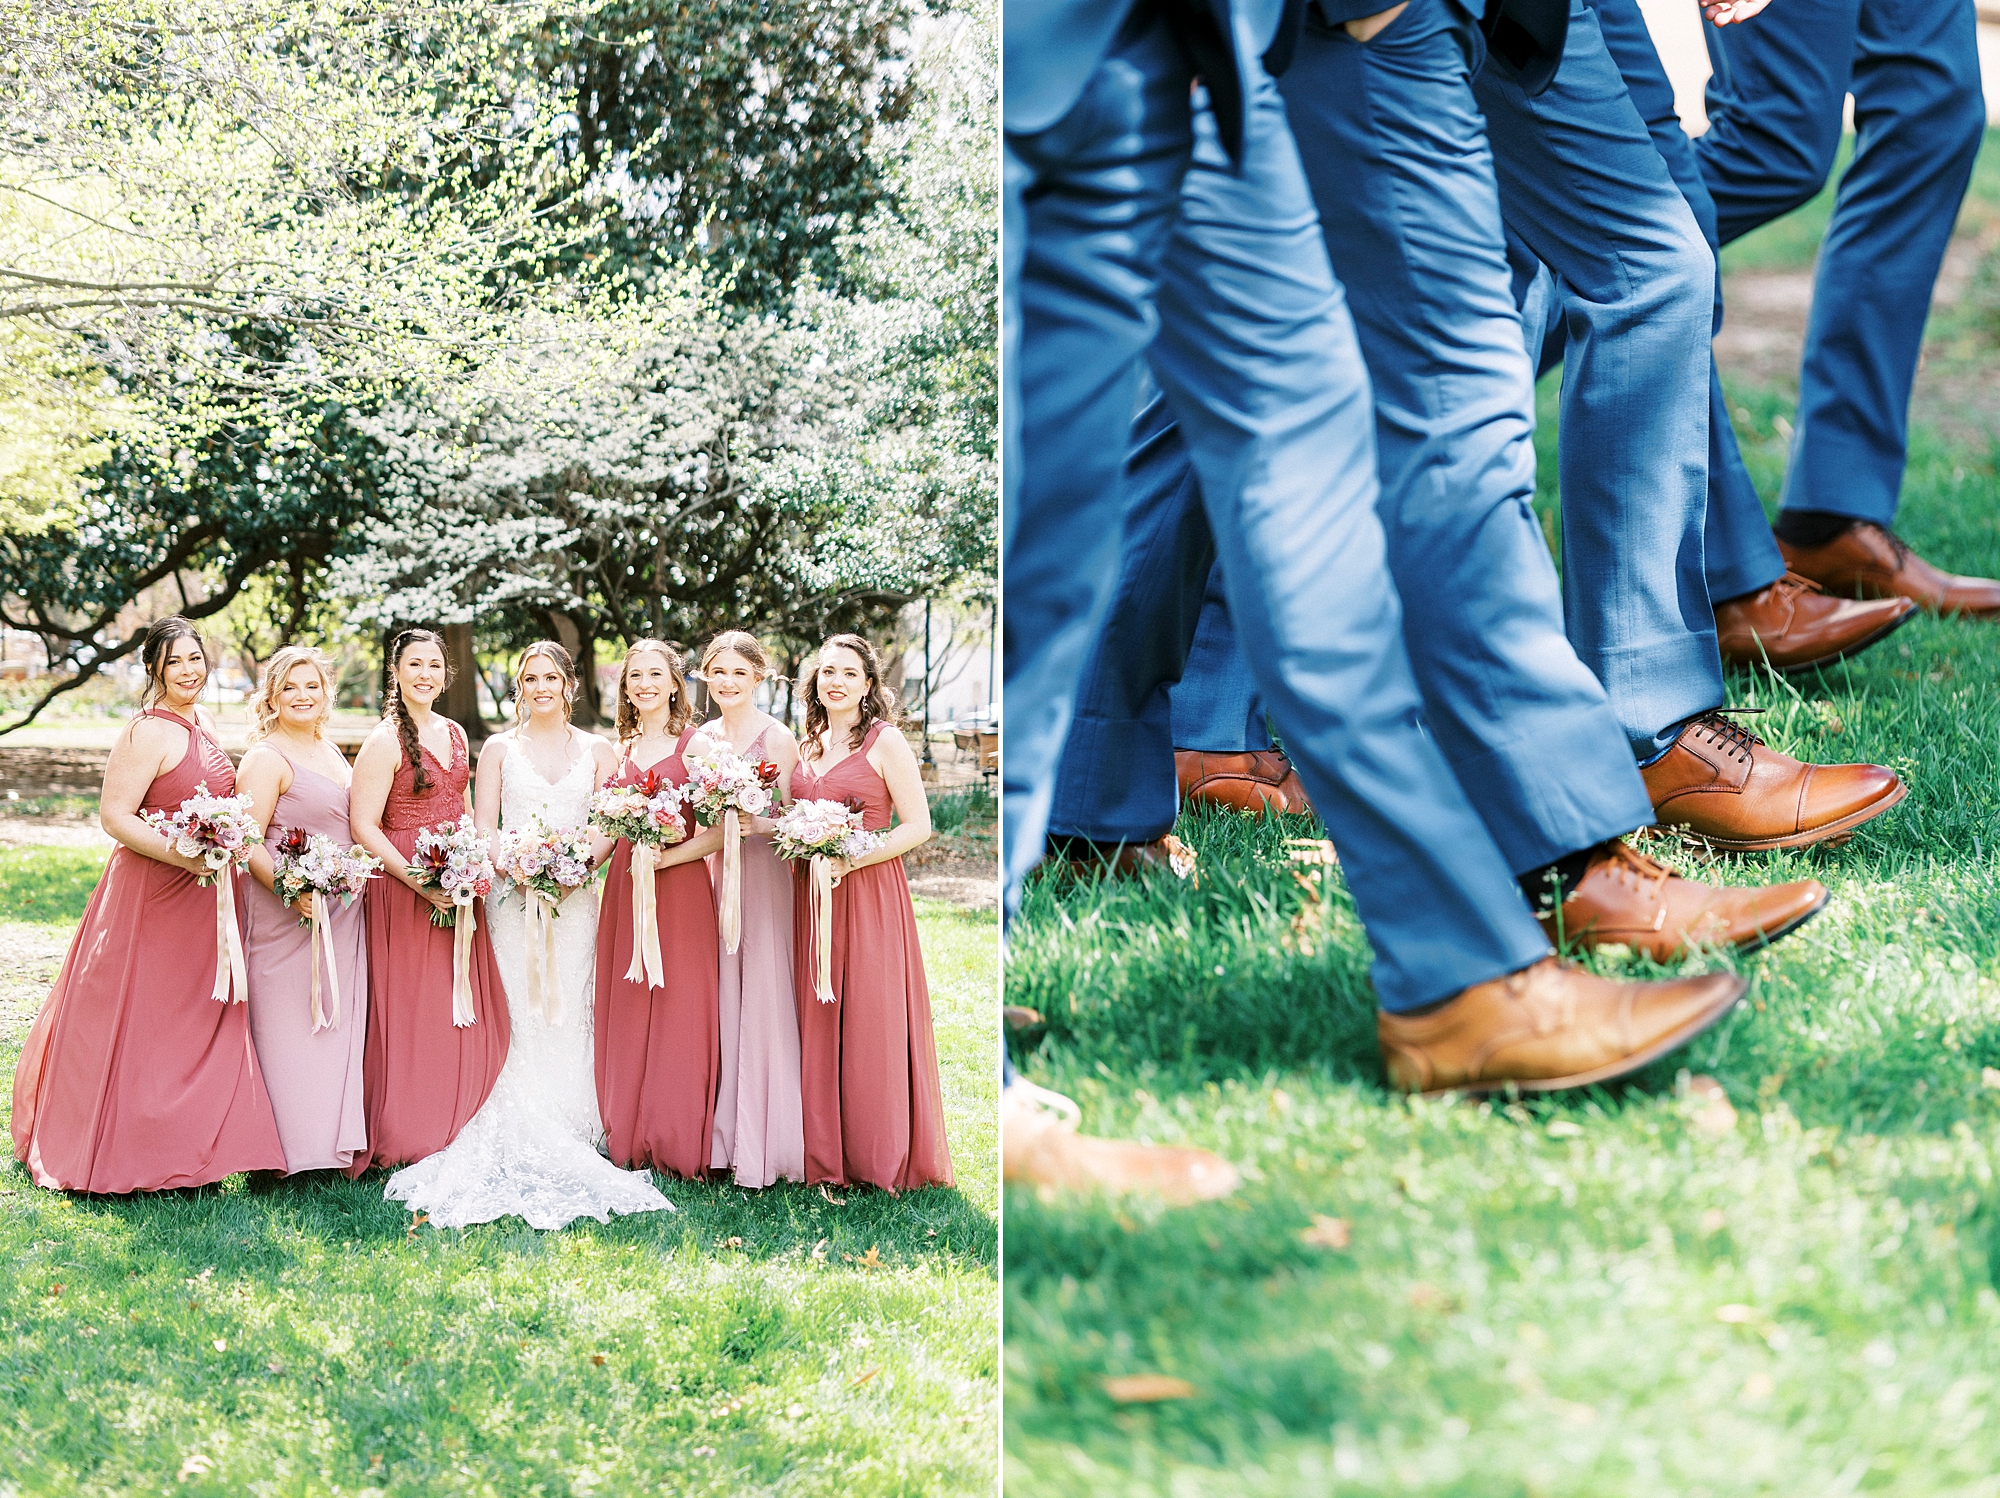 bridesmaids stand together in mismatched gowns with groomsmen in navy suits